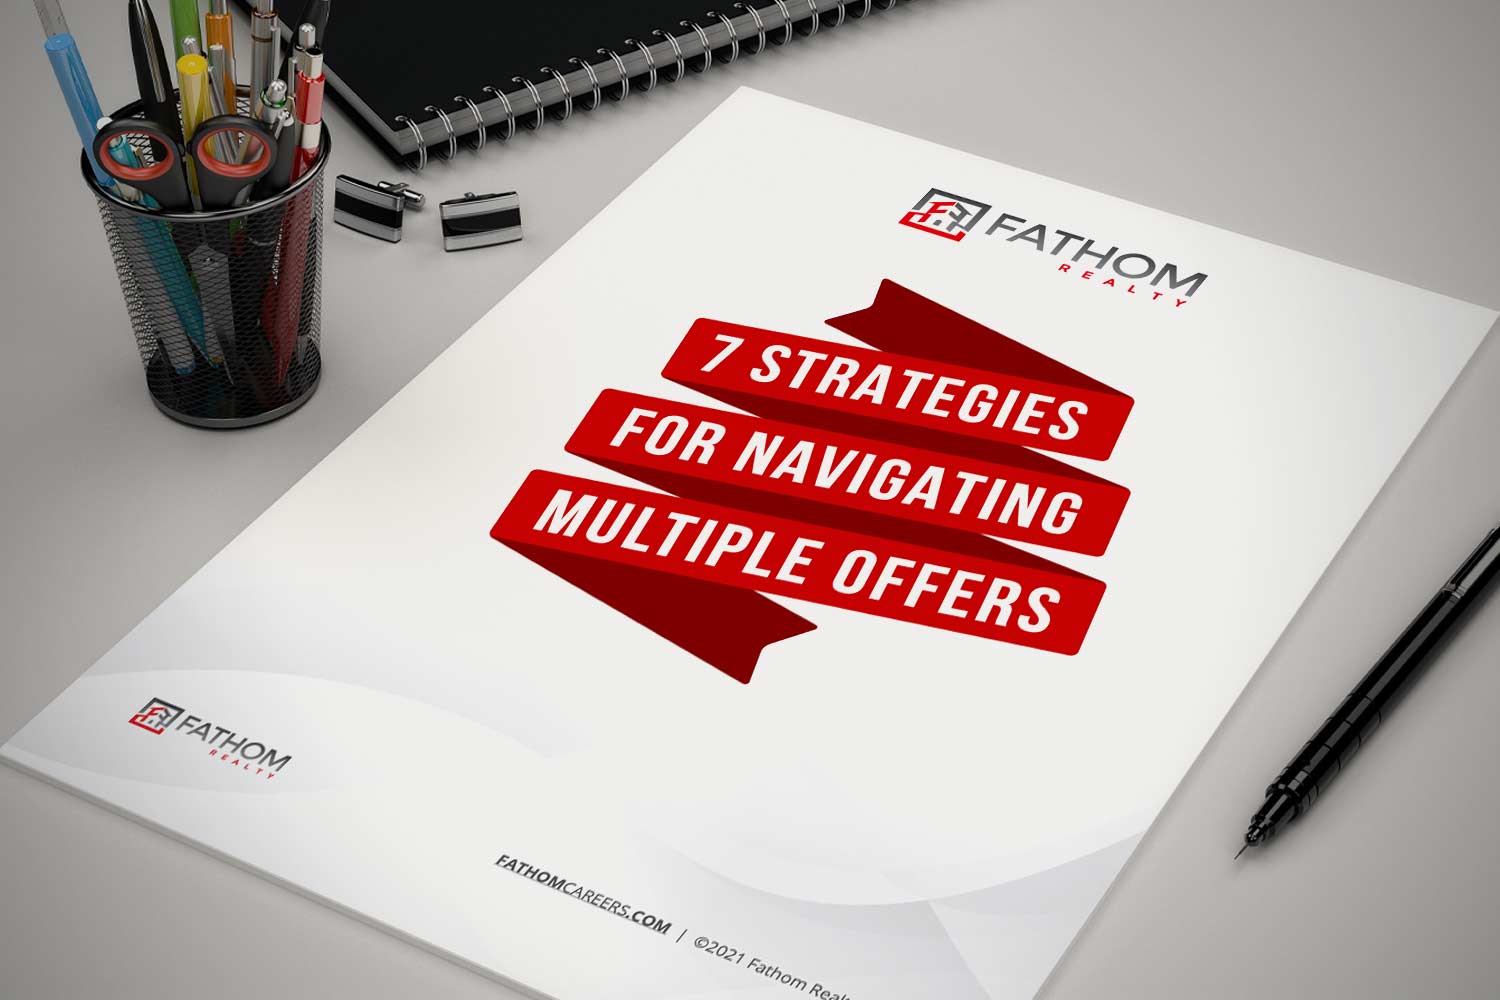 7 Strategies For Navigating Multiple Offers